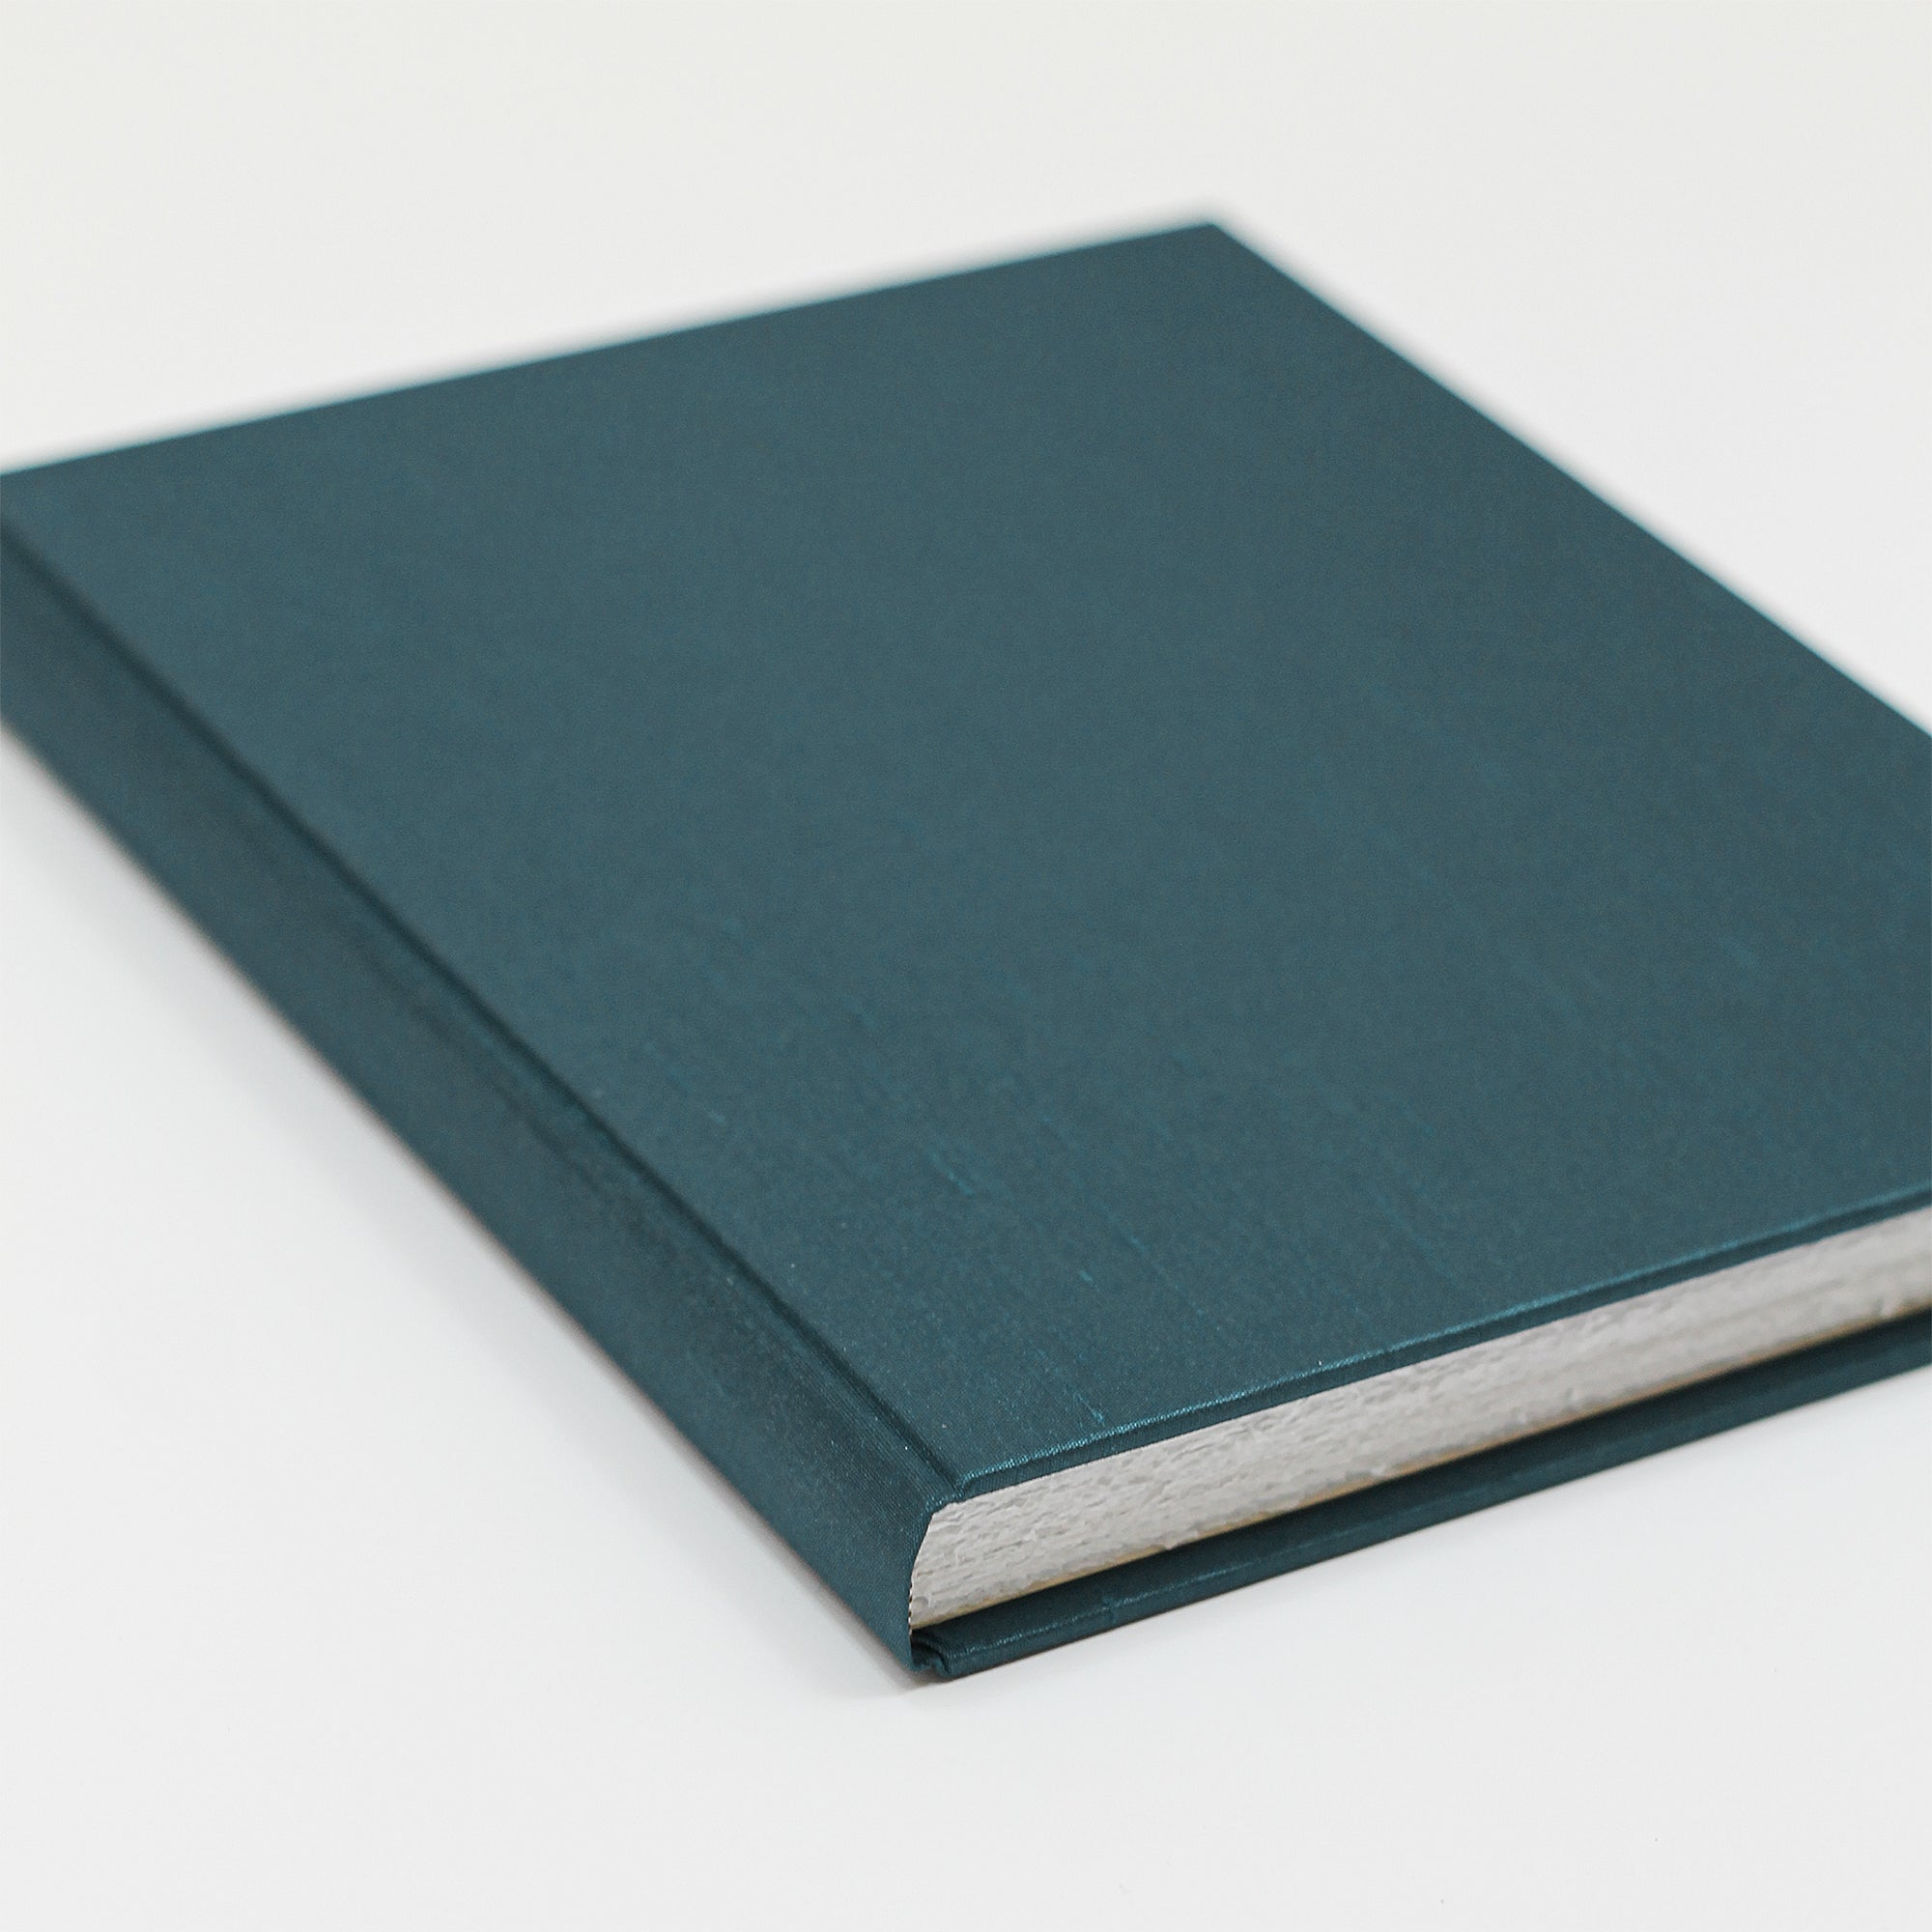 Large 8x10 Blank Page Journal, Cover: Teal Blue Silk